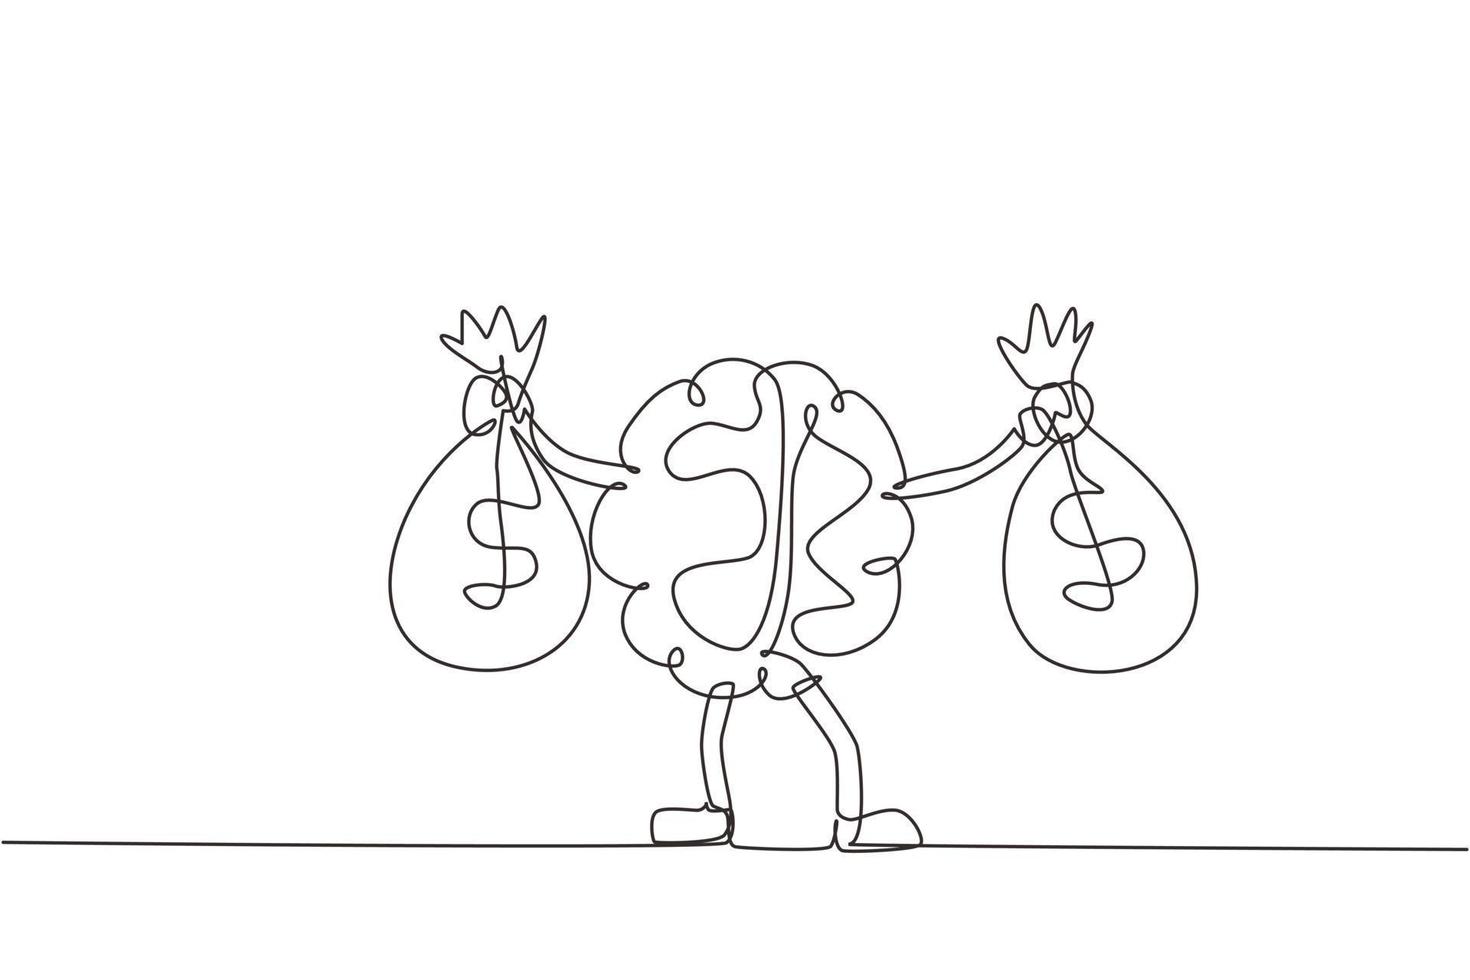 Single continuous line drawing brain holding money bag with two hands. Cute brain mascot character illustration holding bag full of money. Dynamic one line draw graphic design vector illustration